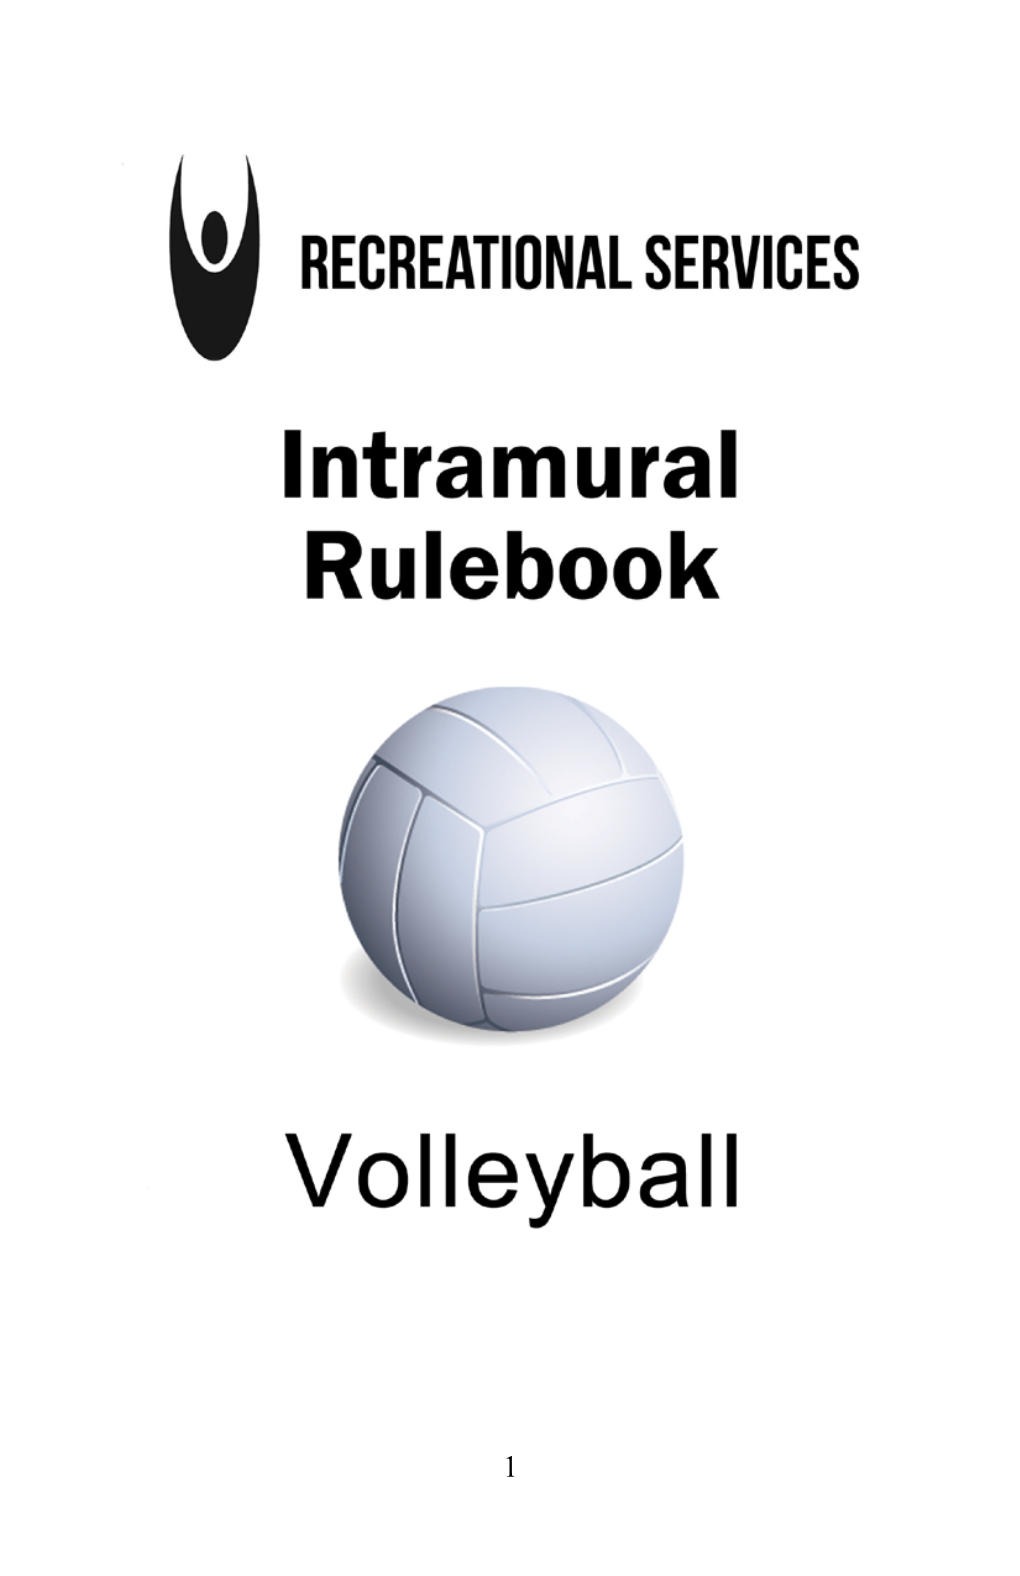 VOLLEYBALL RULES Italicized Print Indicates a Rule Change Or Clarification from the Previous Year